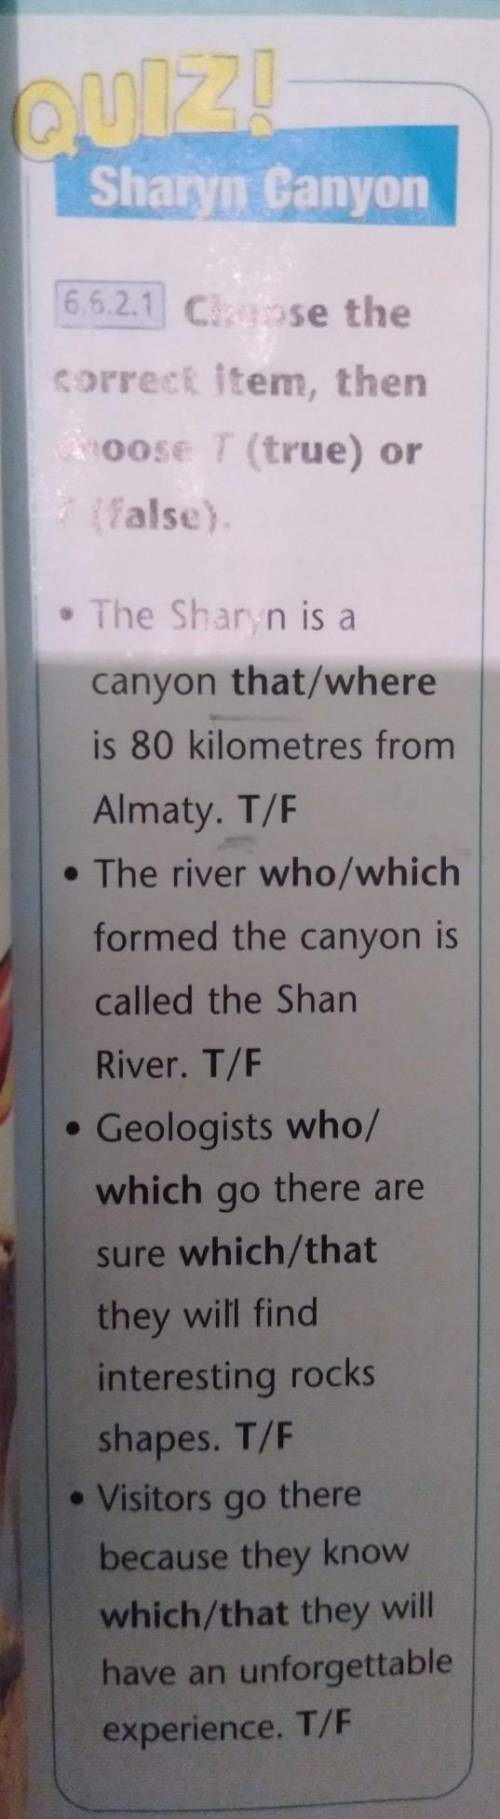 6.6.2.1 Choose the correct item, then choose T (true) or F (false). • The Sharyn is a canyon *that/w